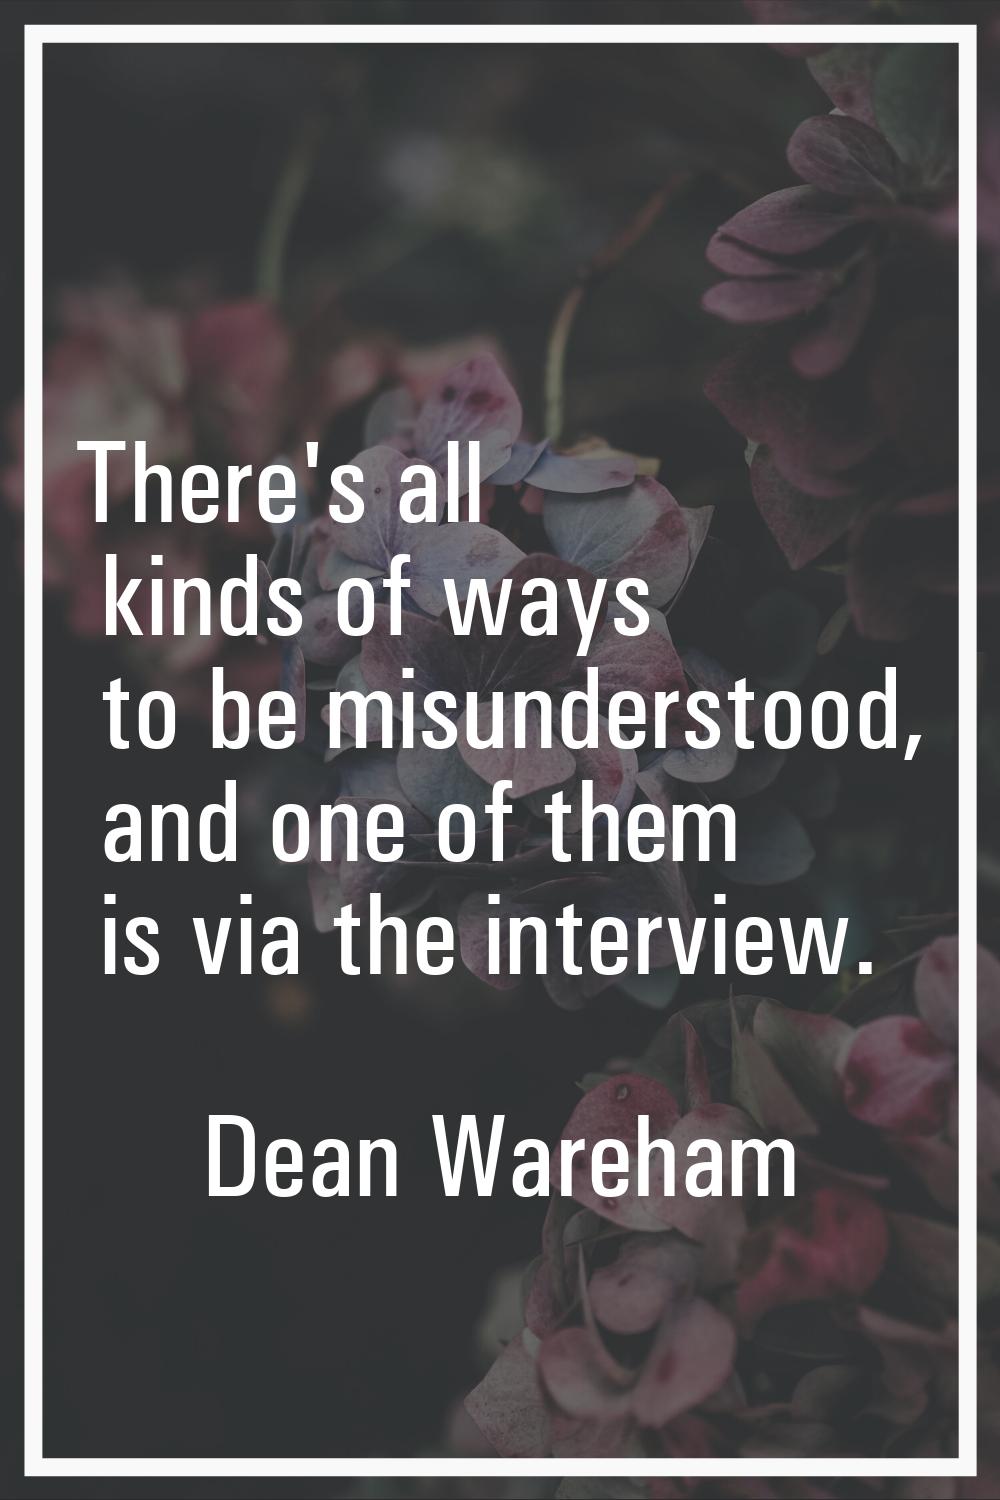 There's all kinds of ways to be misunderstood, and one of them is via the interview.